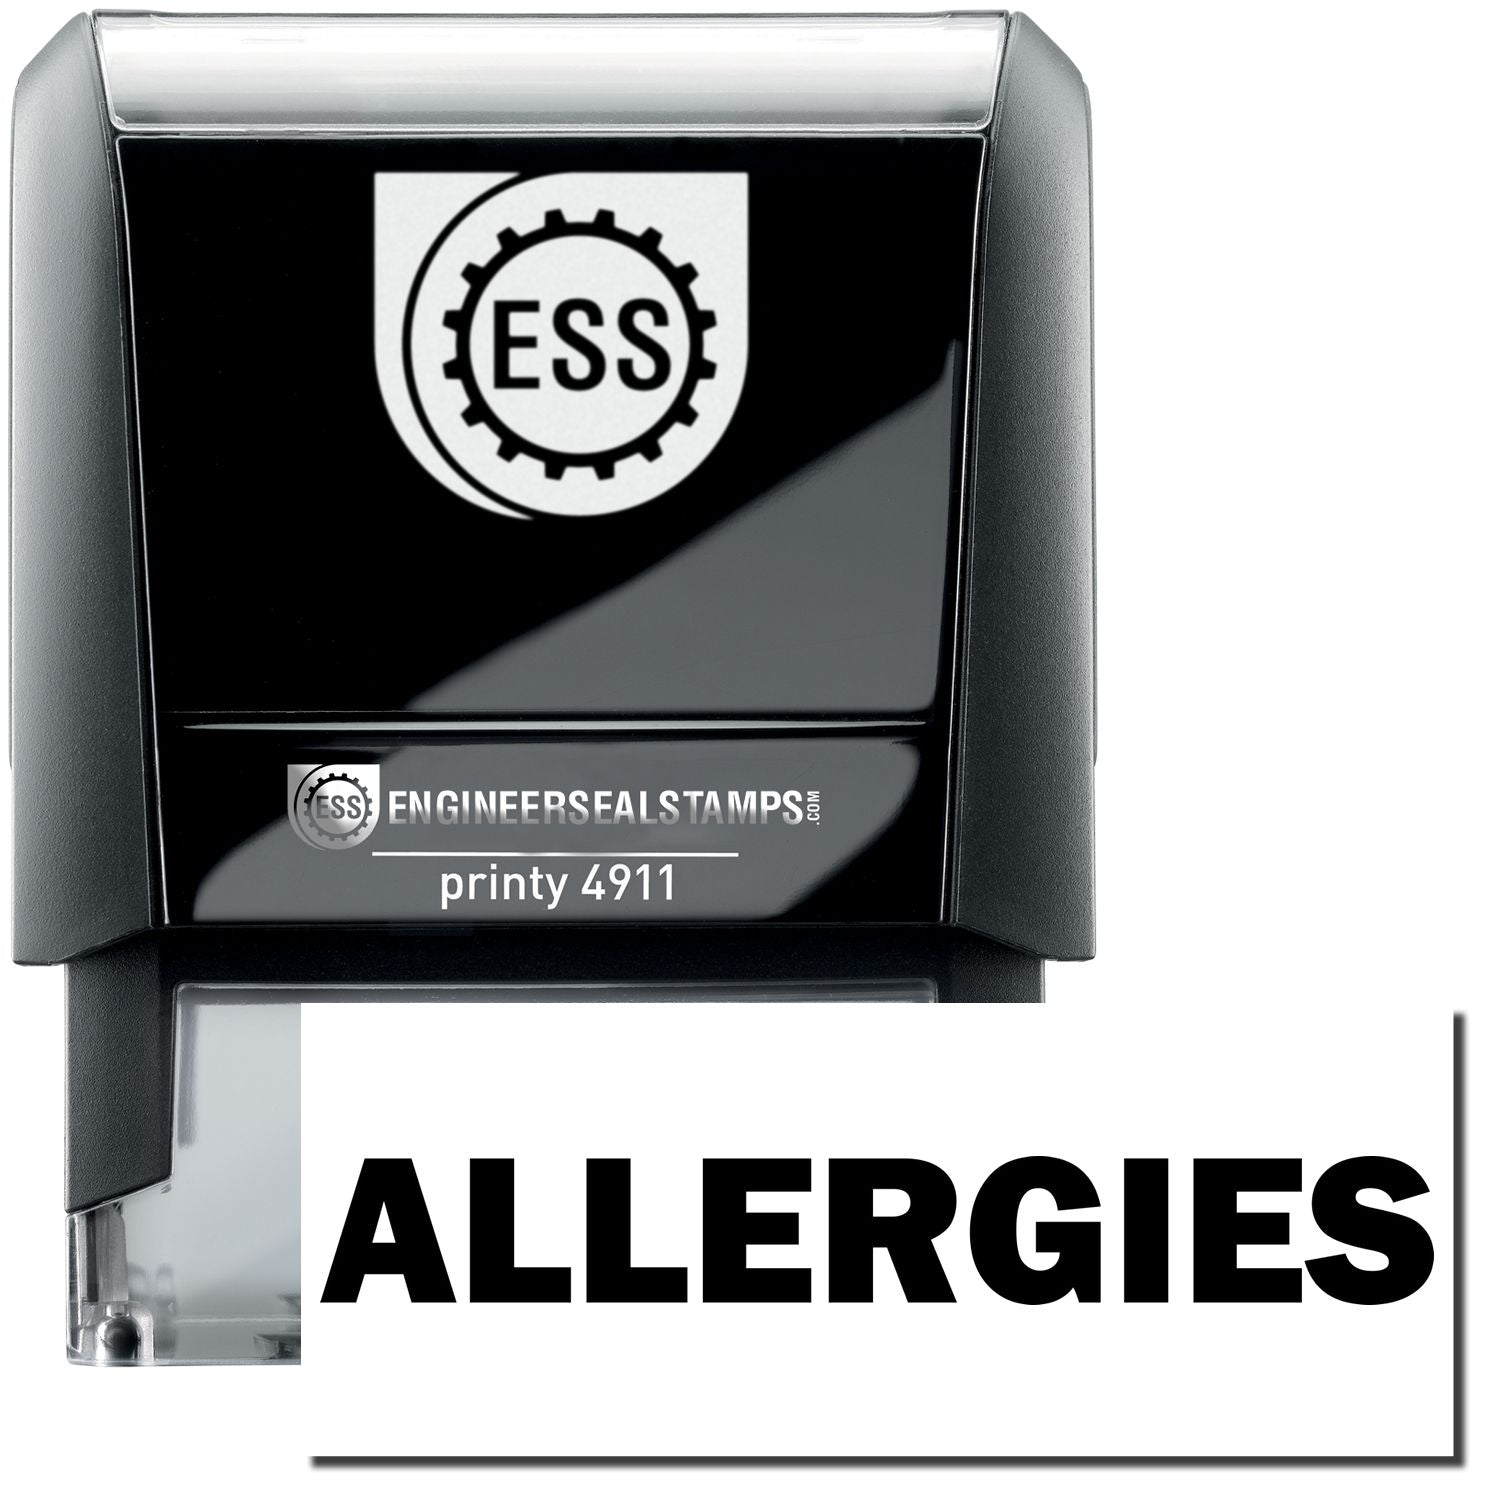 A self-inking stamp with a stamped image showing how the text "ALLERGIES" in bold font is displayed after stamping.